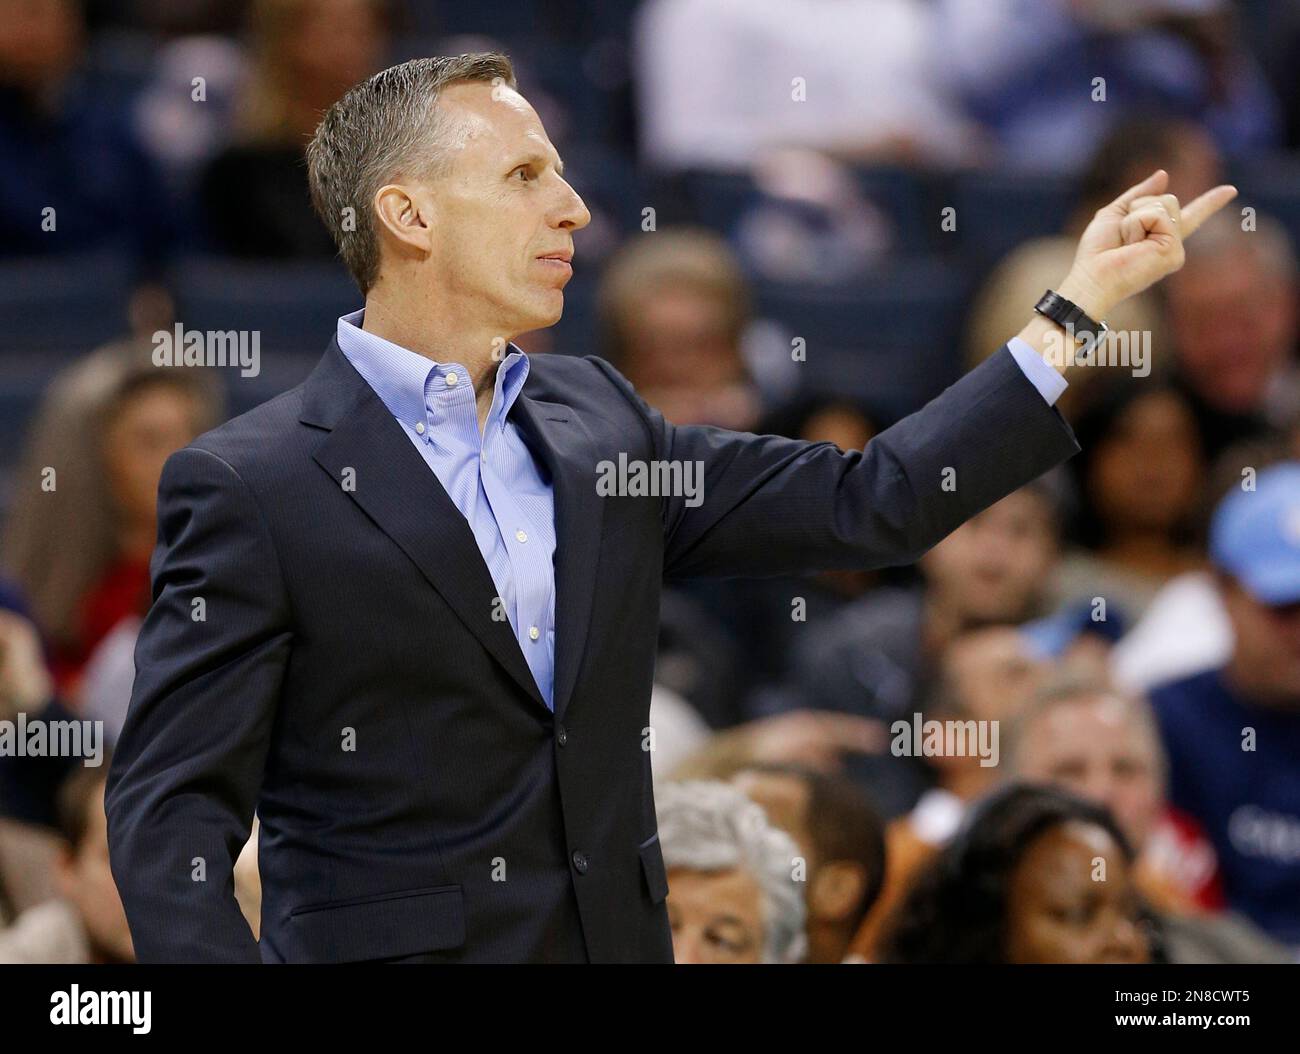 UPDATED: Charlotte Bobcats fire coach Mike Dunlap after one season